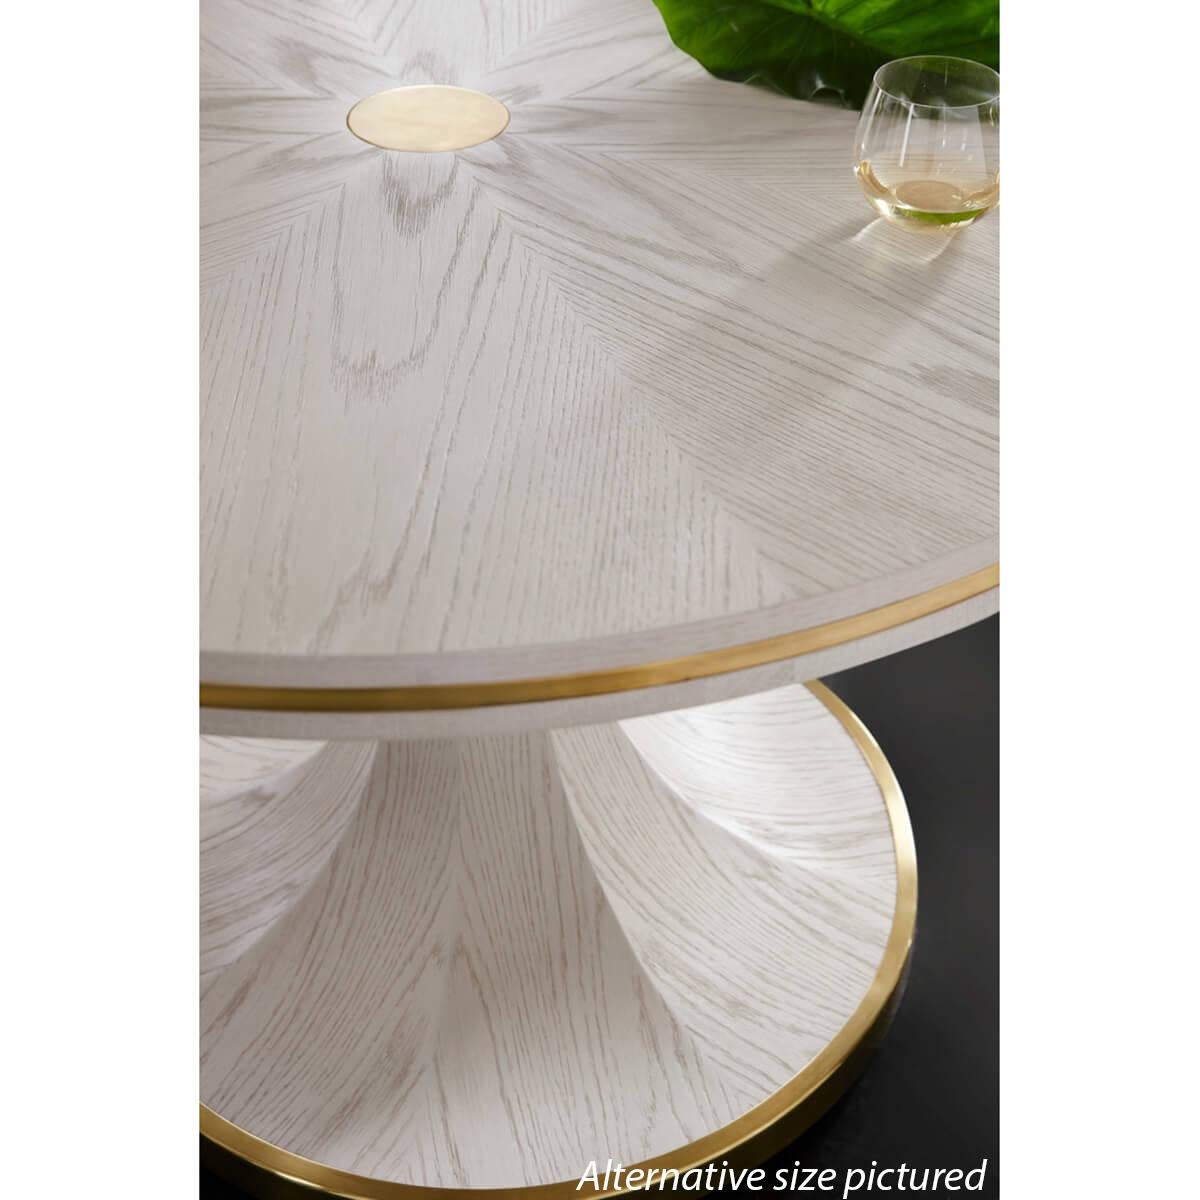 Vietnamese Art Deco White Dining Table For Sale